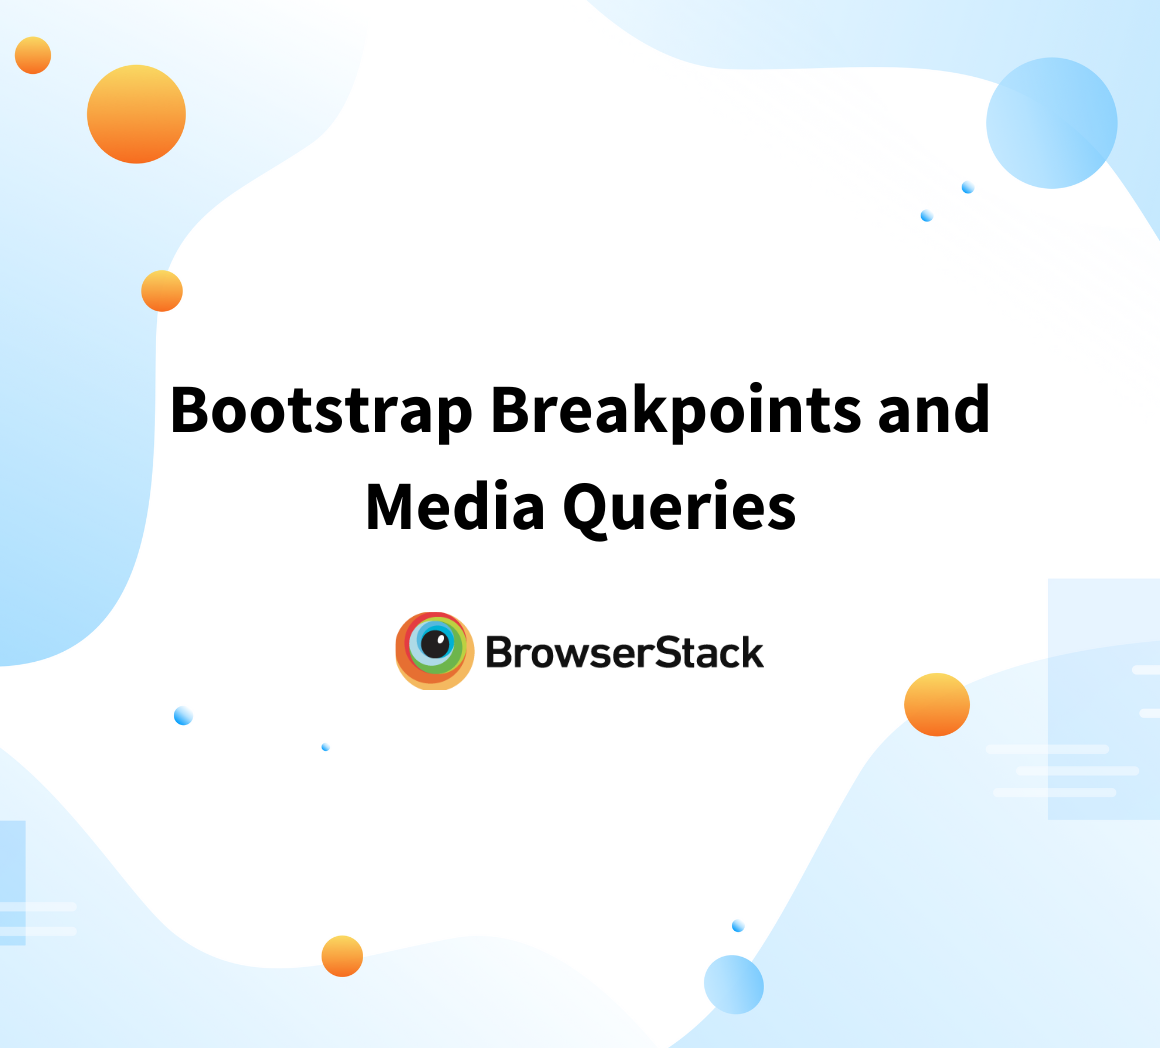 Bootstrap Breakpoints and Media Queries